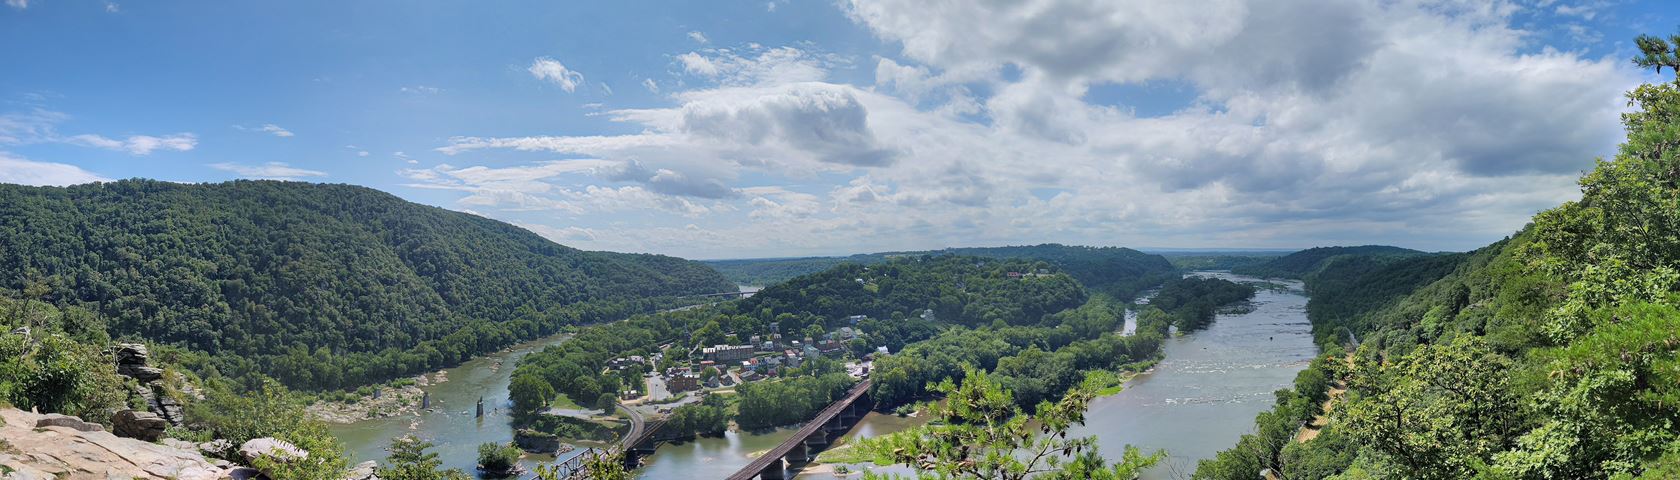 Harpers Ferry - PhotoSphere